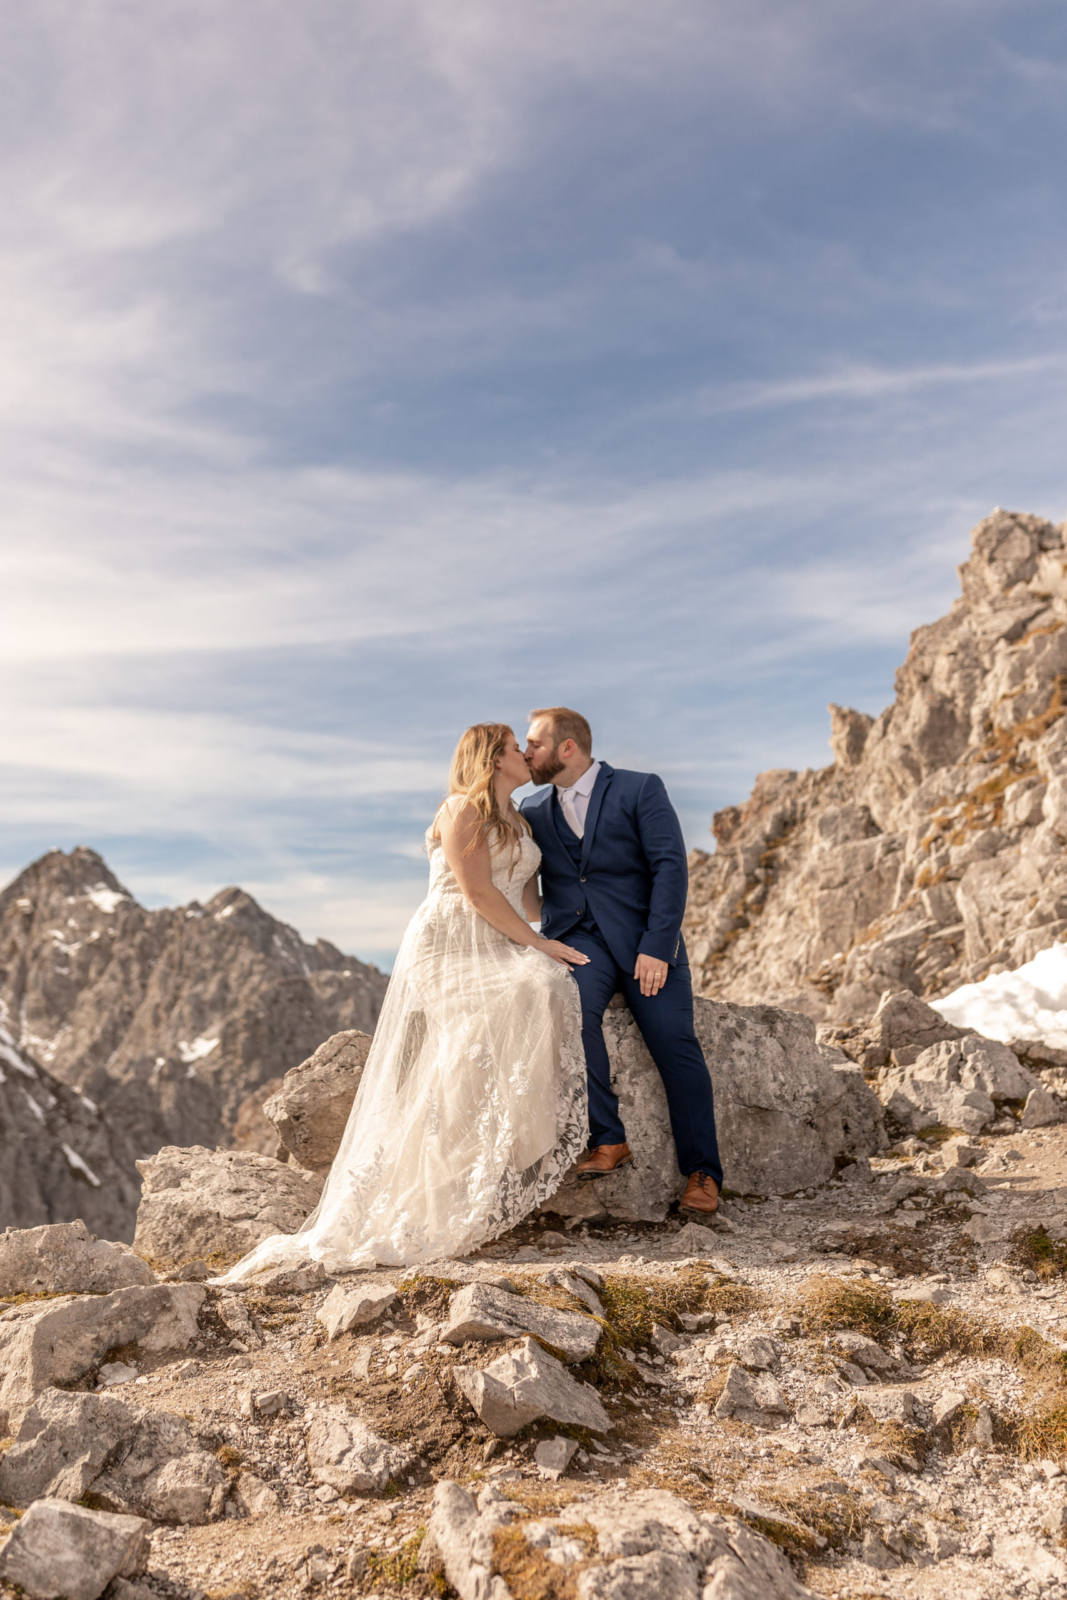 Intimate Wedding in the Mountains